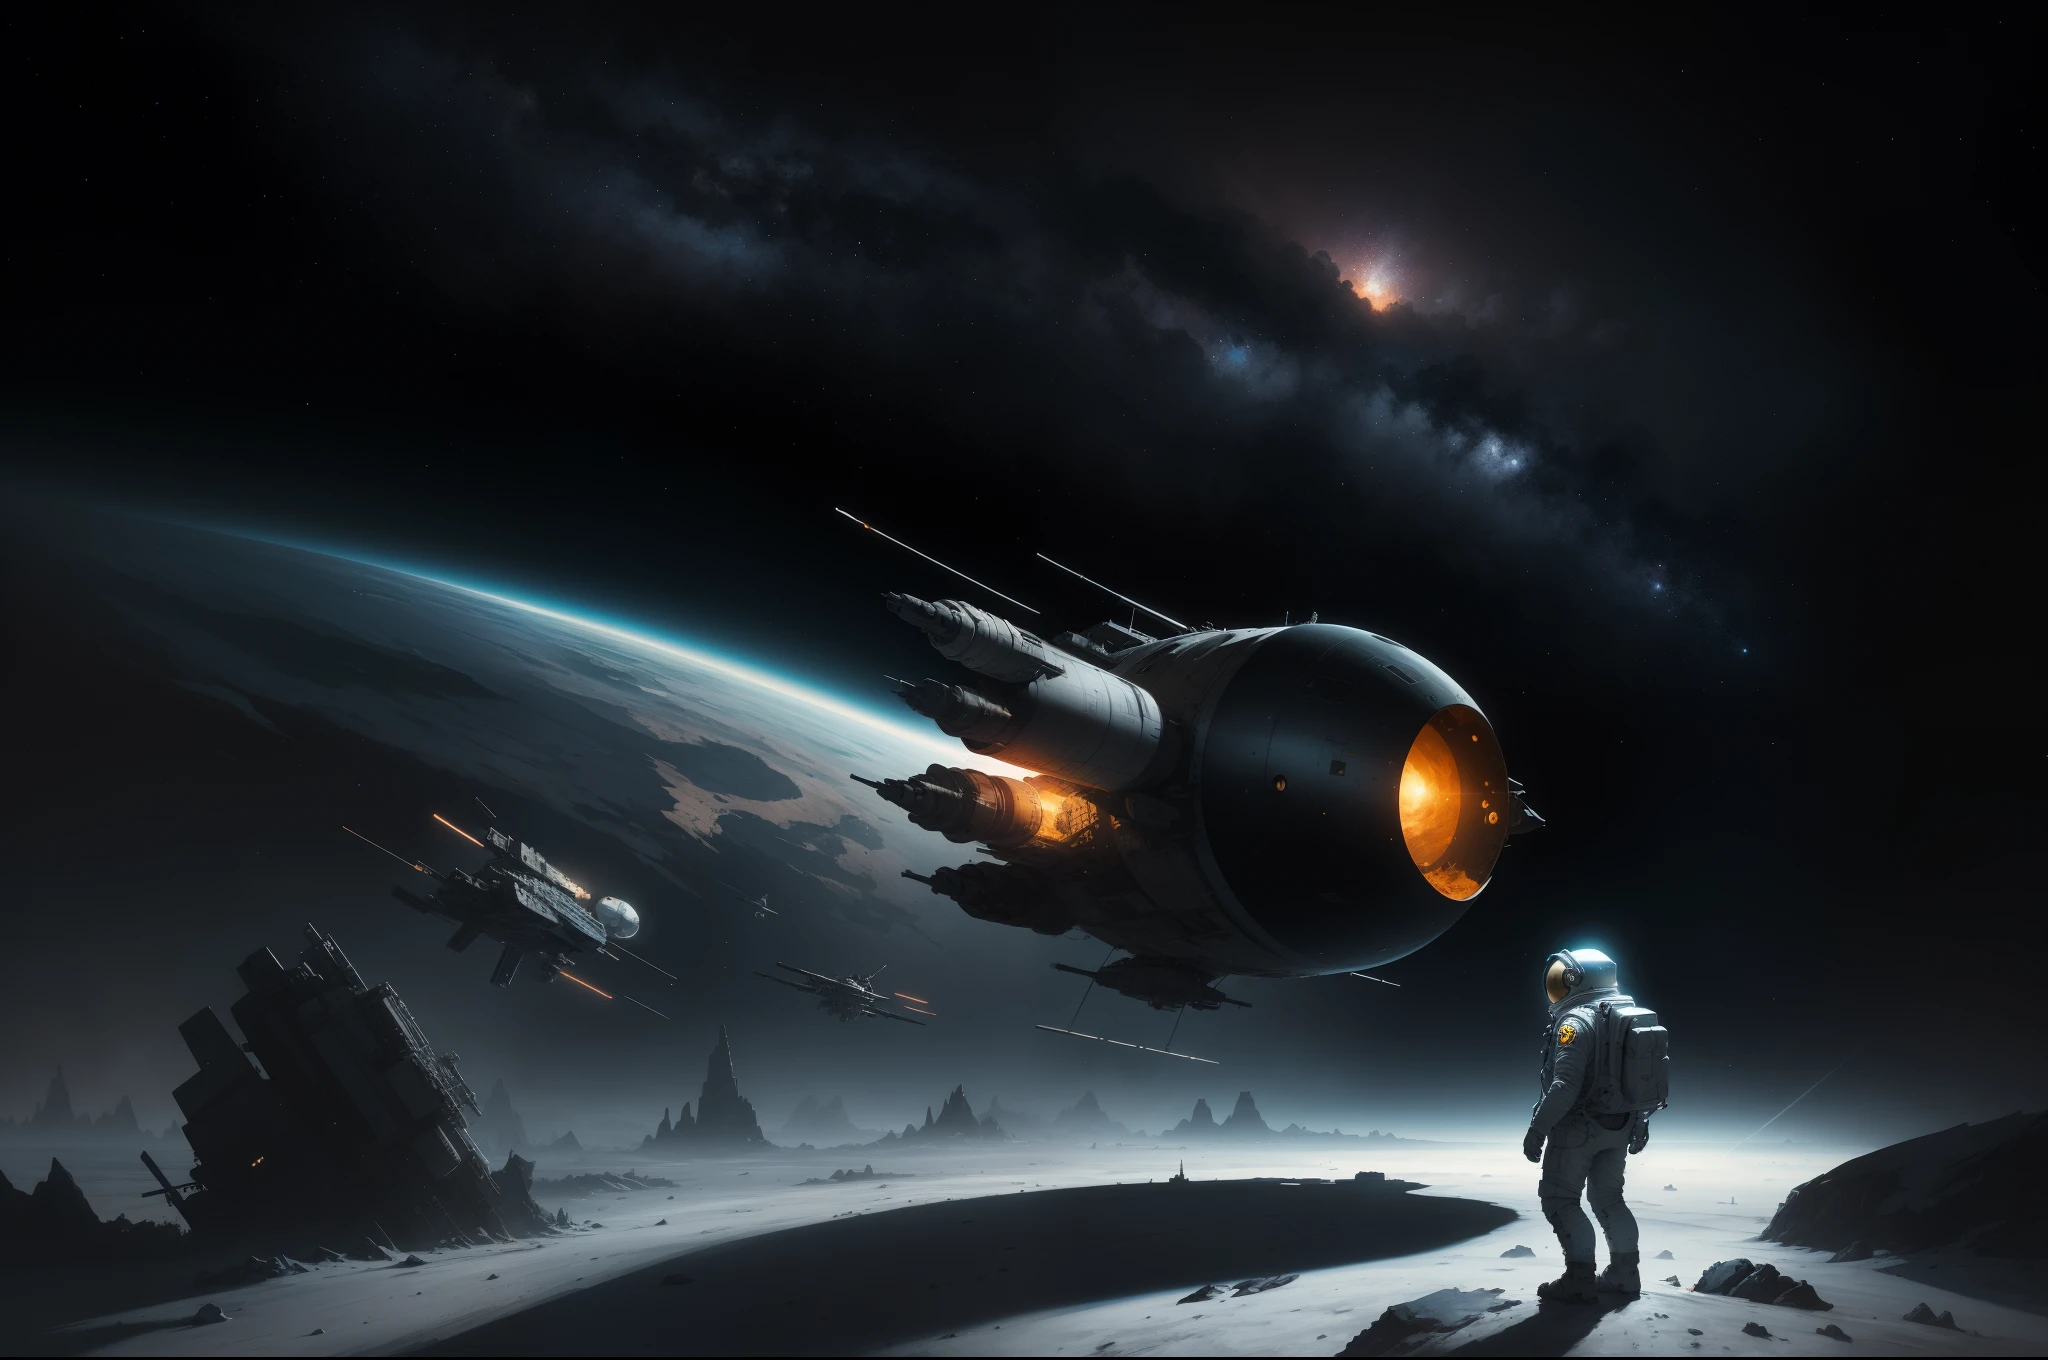 best quality,highres,(realistic:1.37) painting of a government secret space mission,sci-fi,space exploration, astronauts in spacesuits, space shuttle lifting off, satellite deployment, mission control center, earth in the background, stars and galaxies, vivid colors, studio lighting, intense focus, detailed spaceship engines, futuristic technology, mysterious atmosphere, surreal space landscapes, epic space battles, interstellar travel